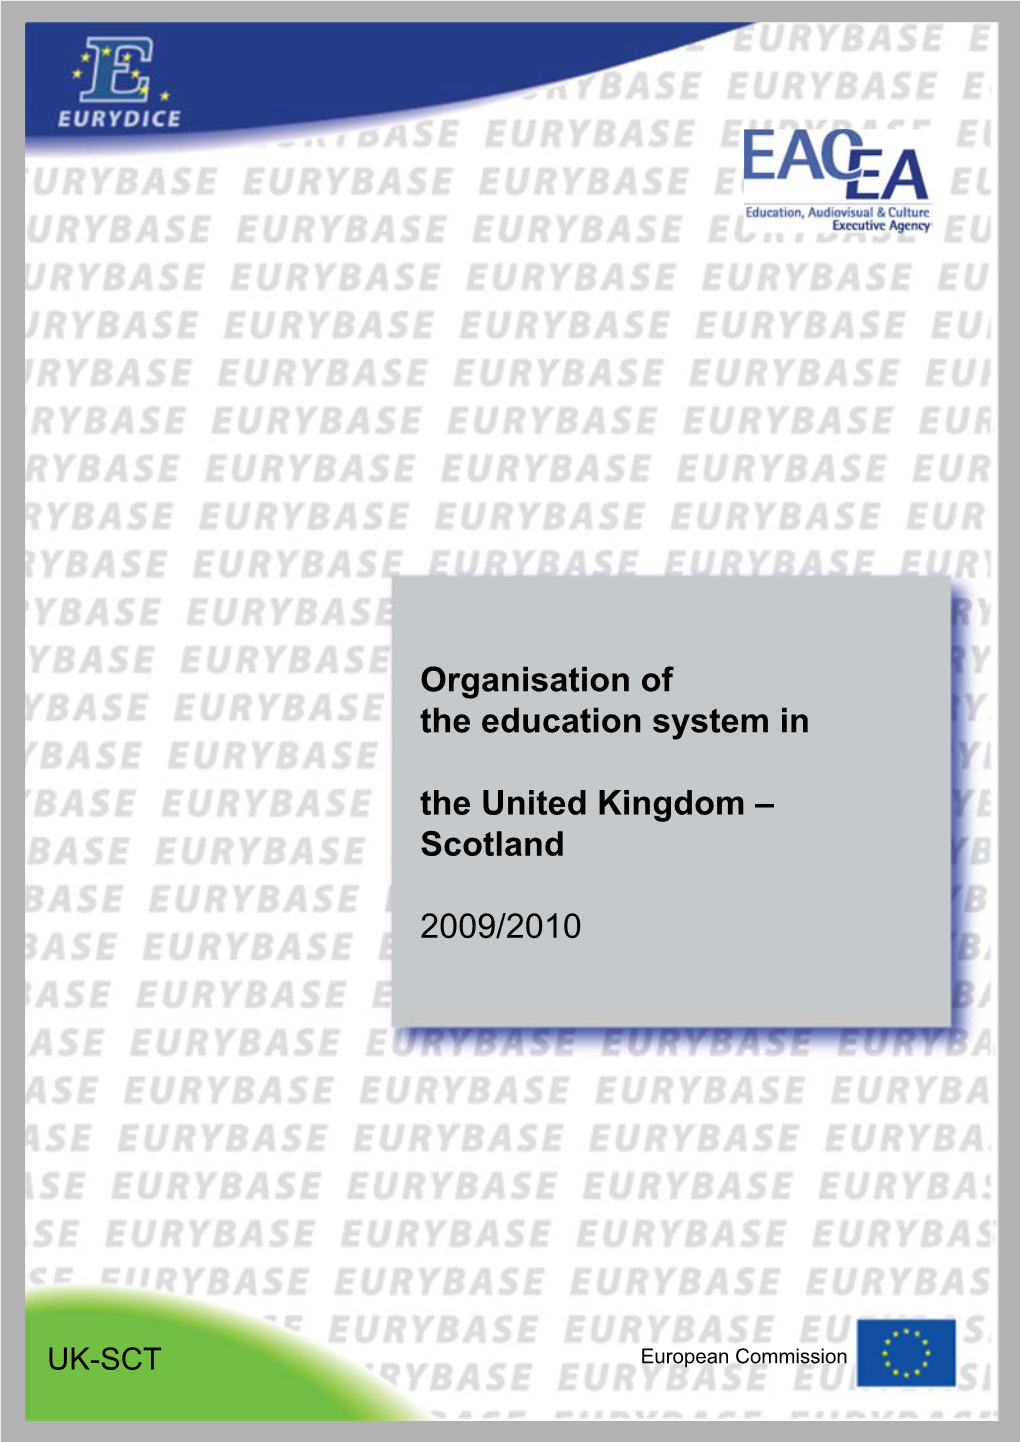 Organisation of the Education System in the United Kingdom (Scotland), 2009/10